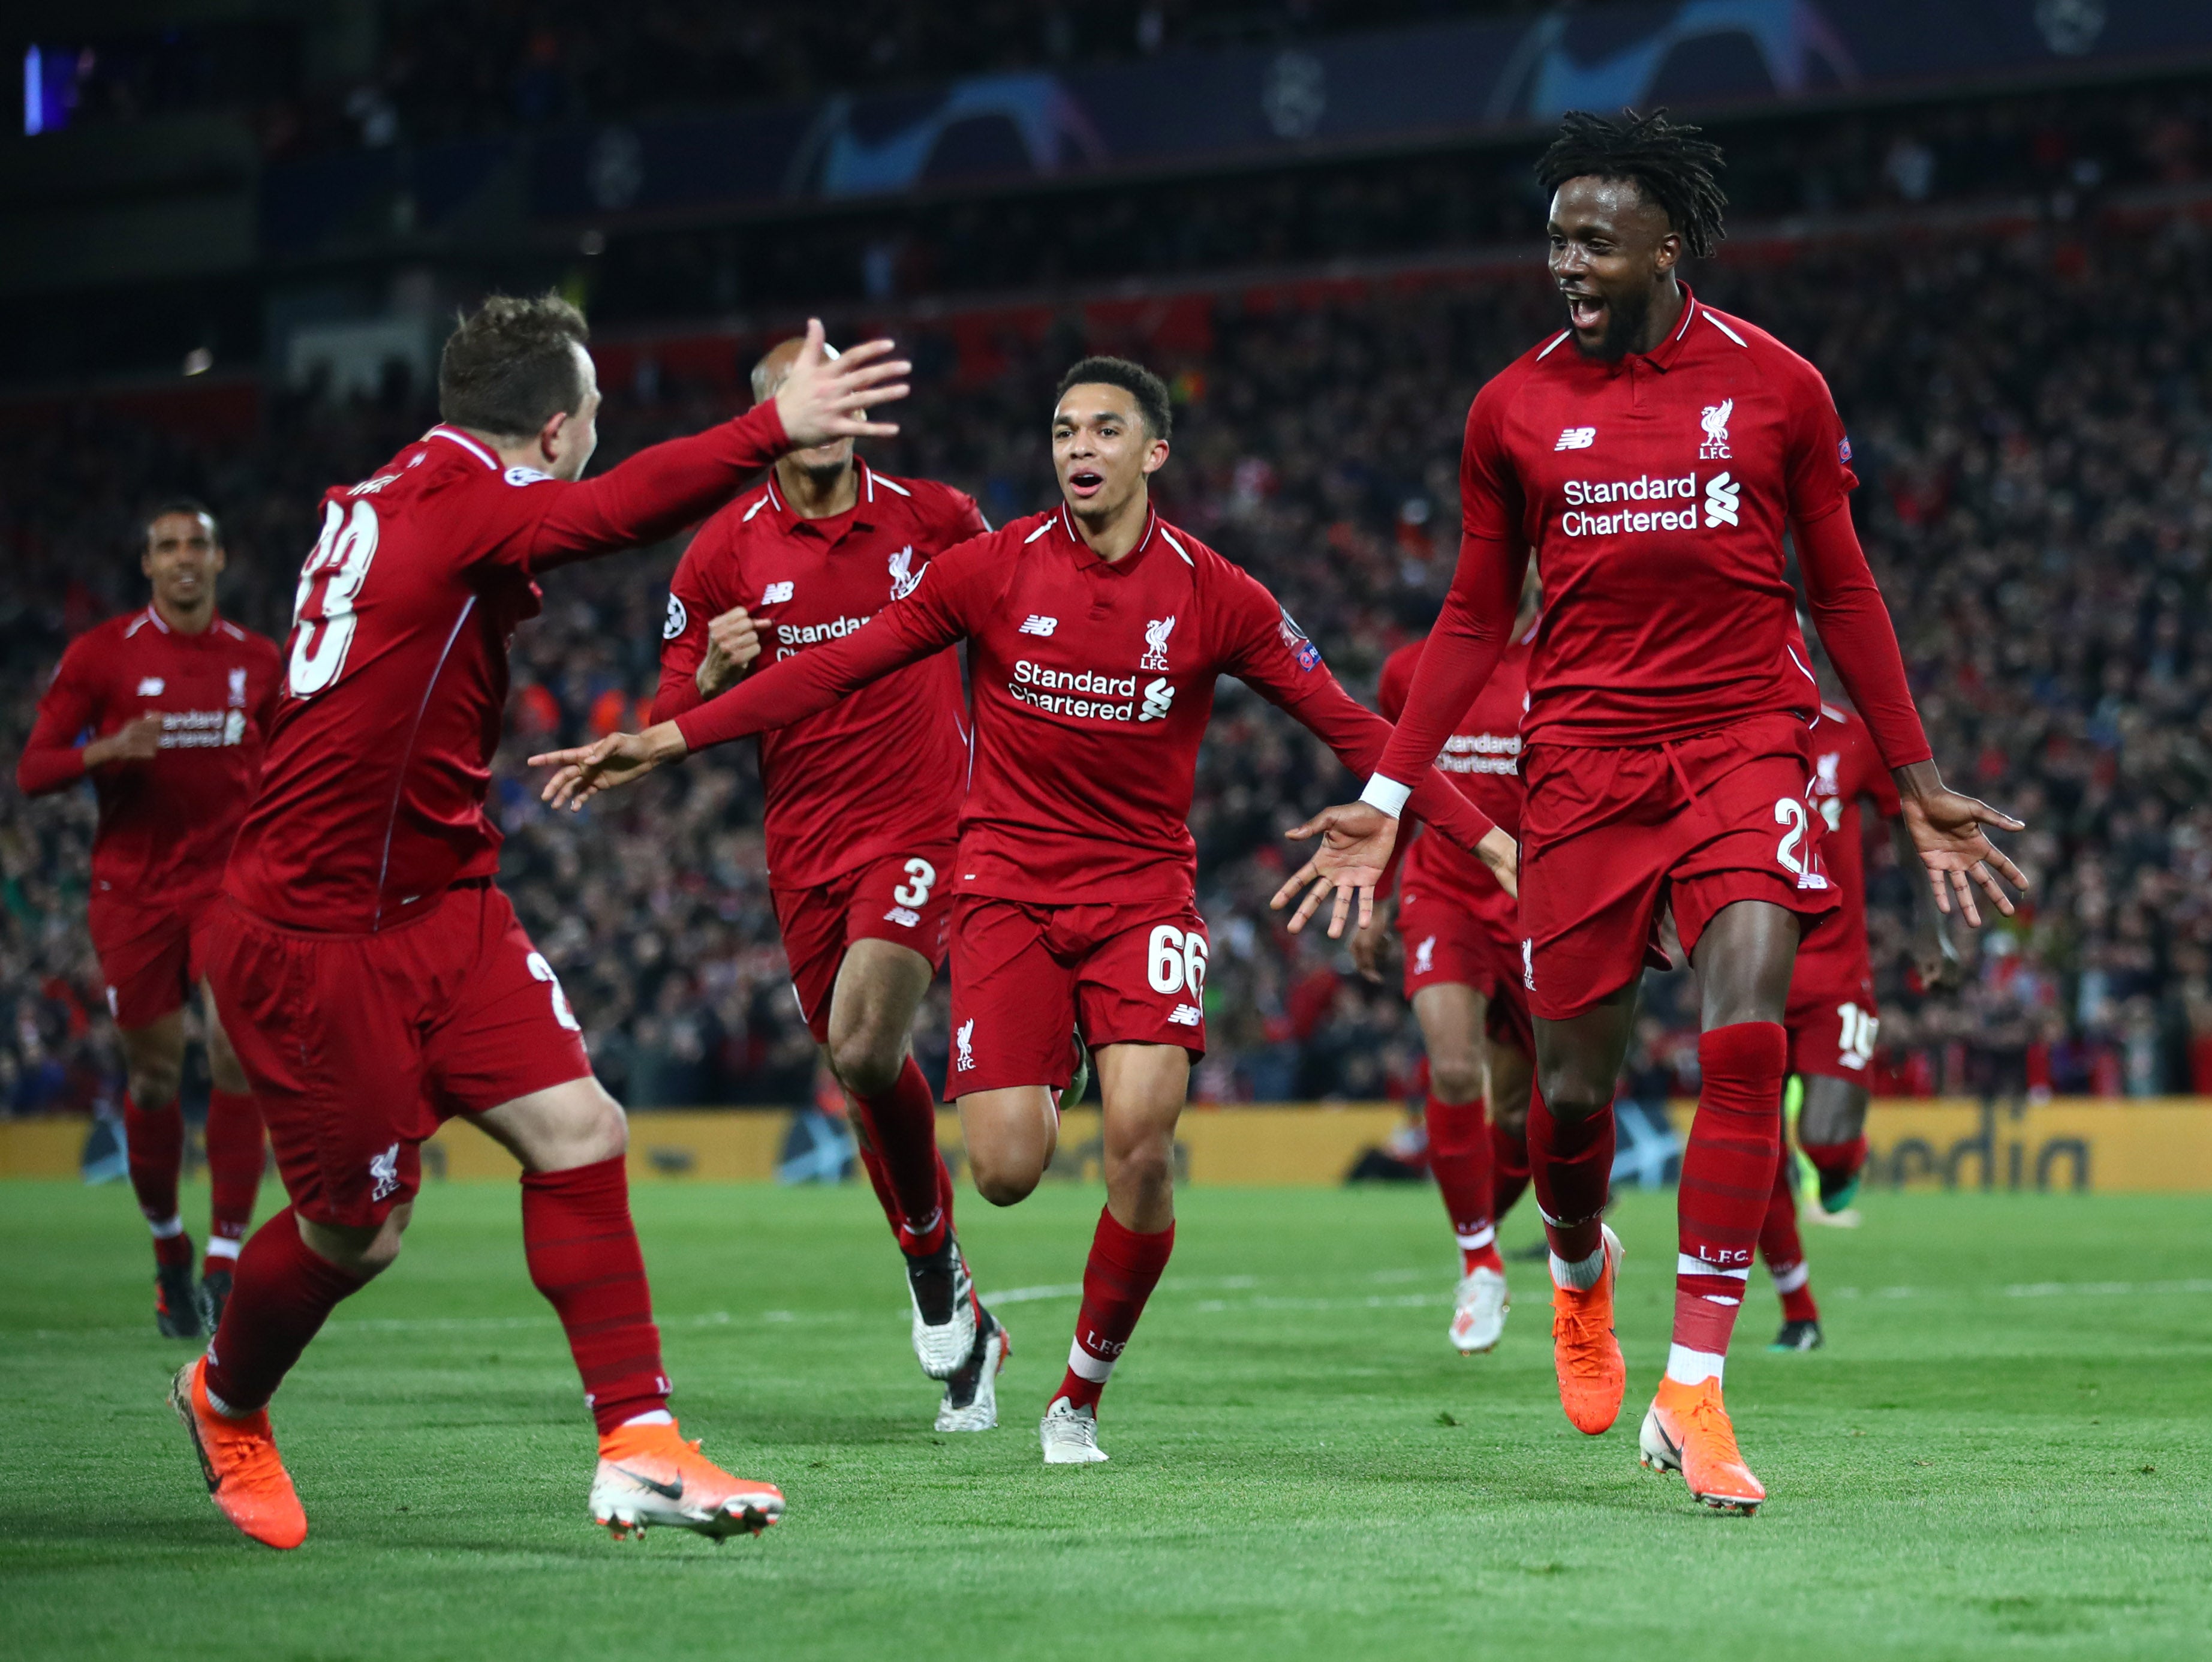 Divock Origi, right, scored Liverpool’s fourth goal on a remarkable night